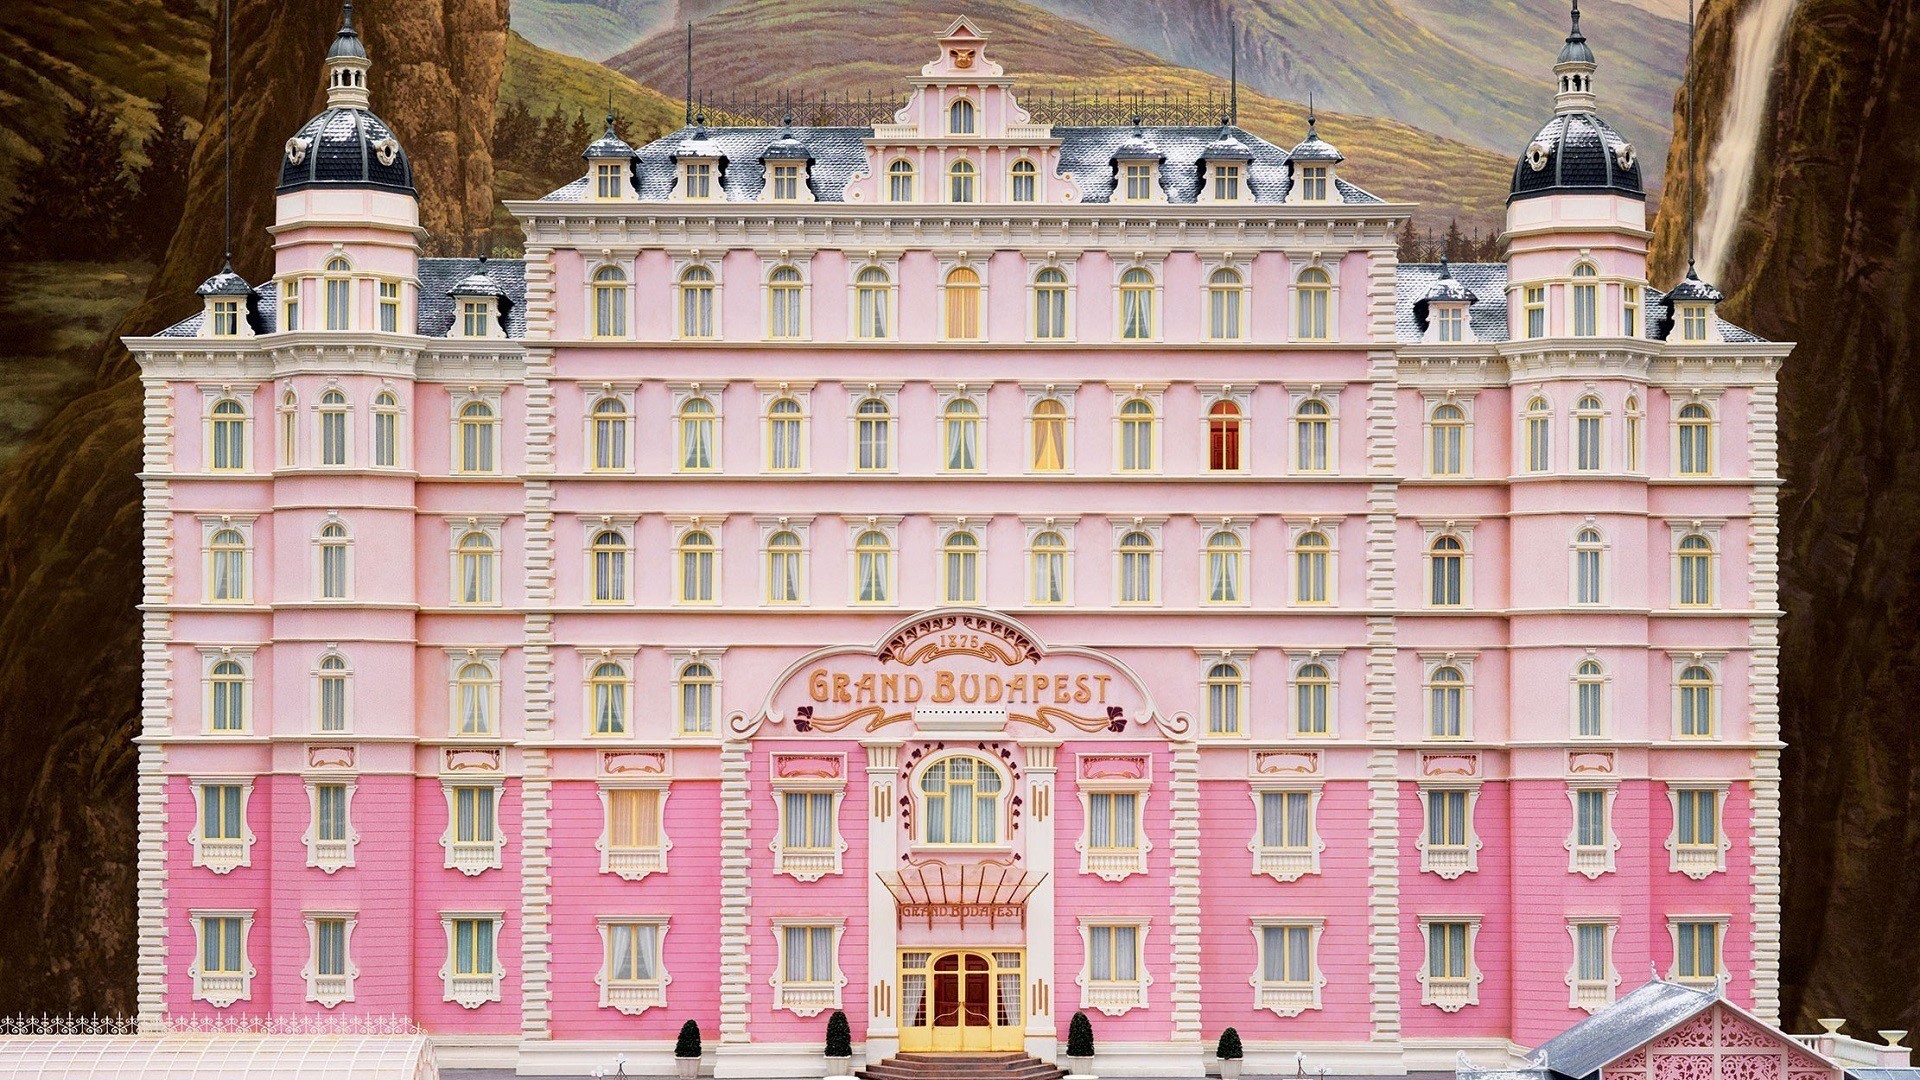 The Grand Budapest Hotel background